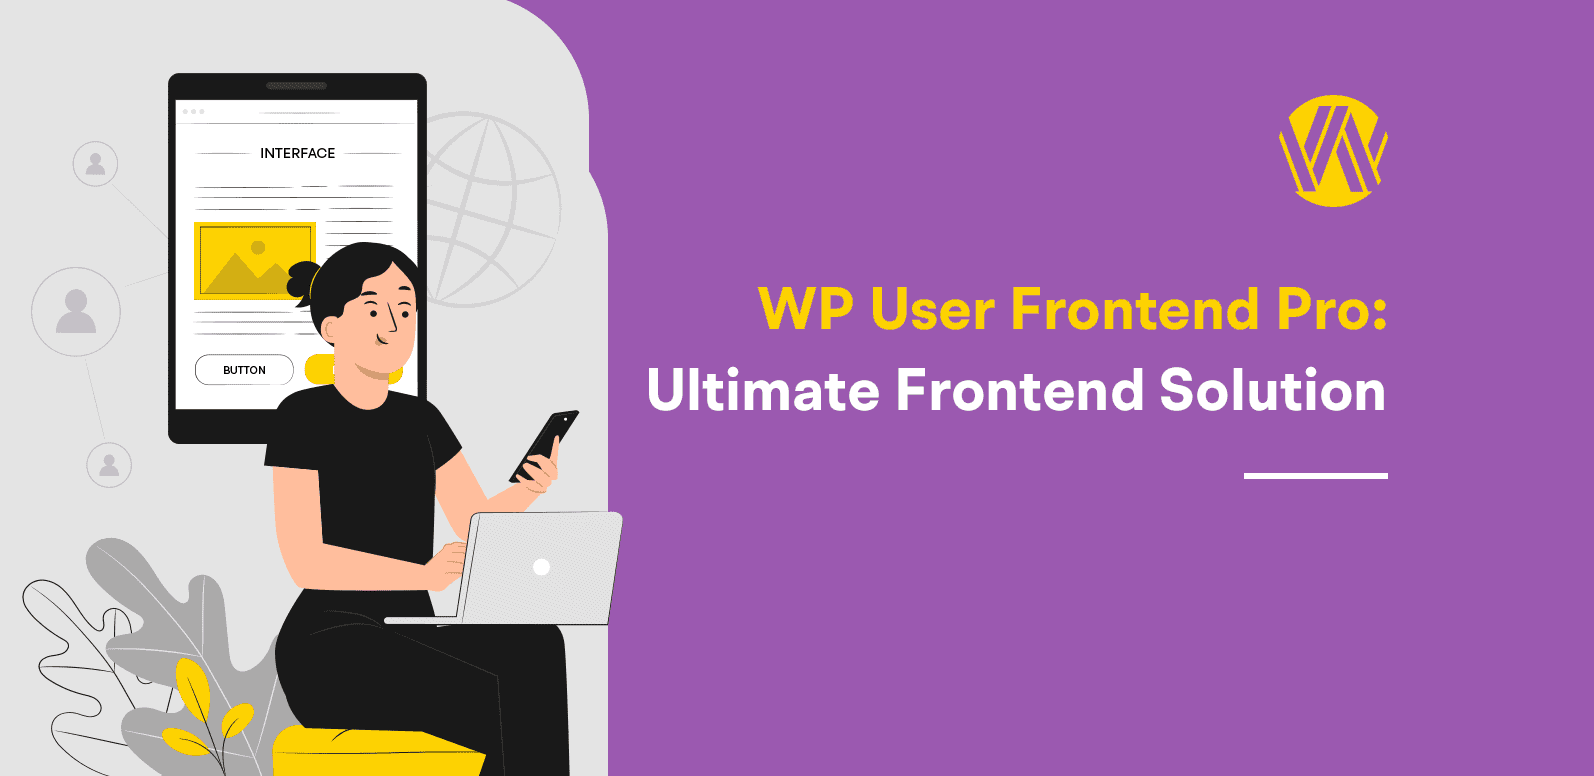 WP User Frontend Pro: Ultimate Frontend Solution